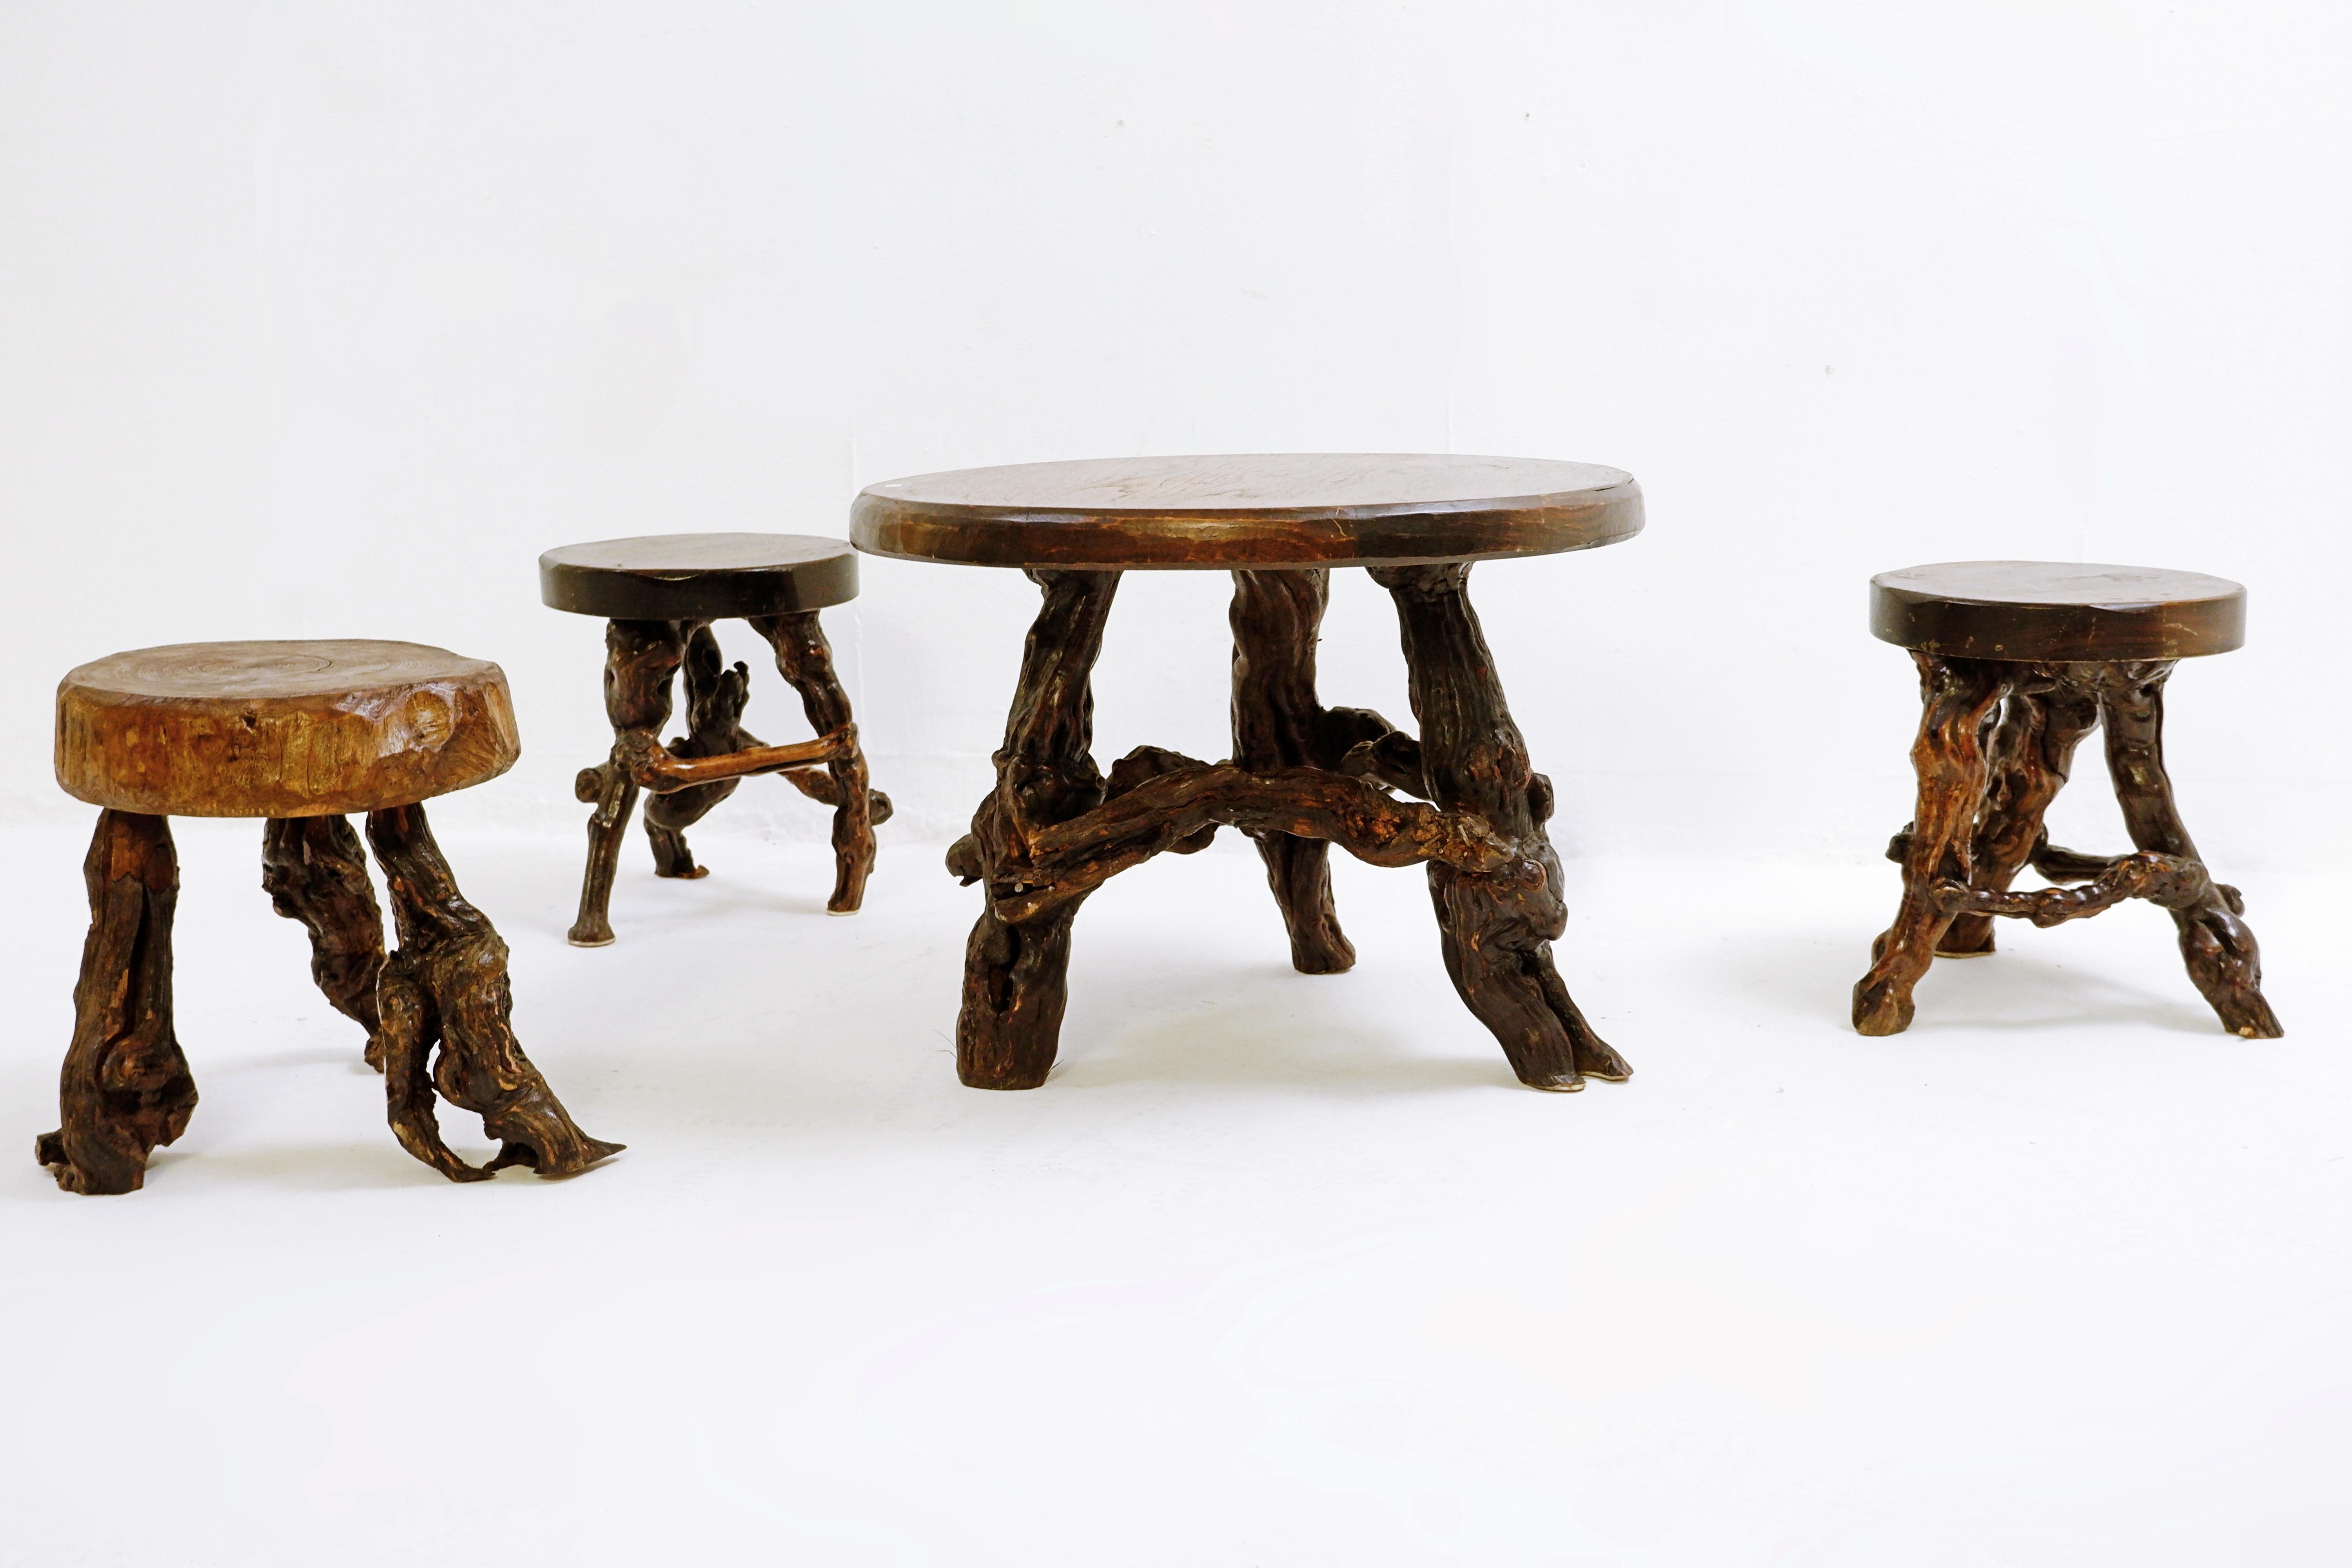 Primitive set table / stools with round slab seat and legs constructed from vines - set of 4 - circa 1960.